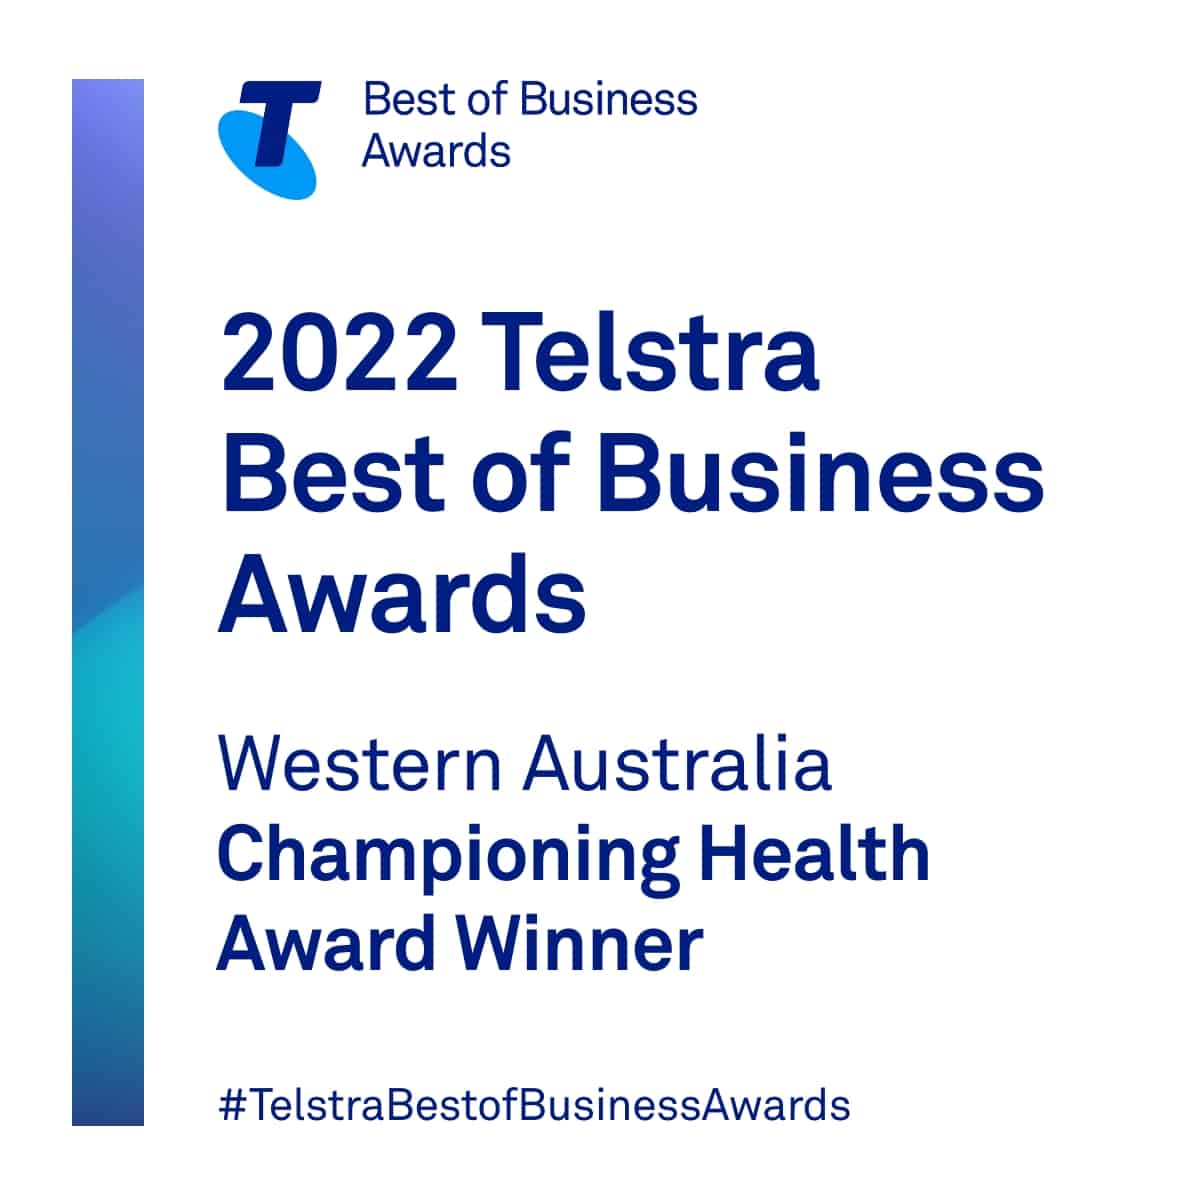 State Winner in the Telstra Best of Business Awards for Championing Health